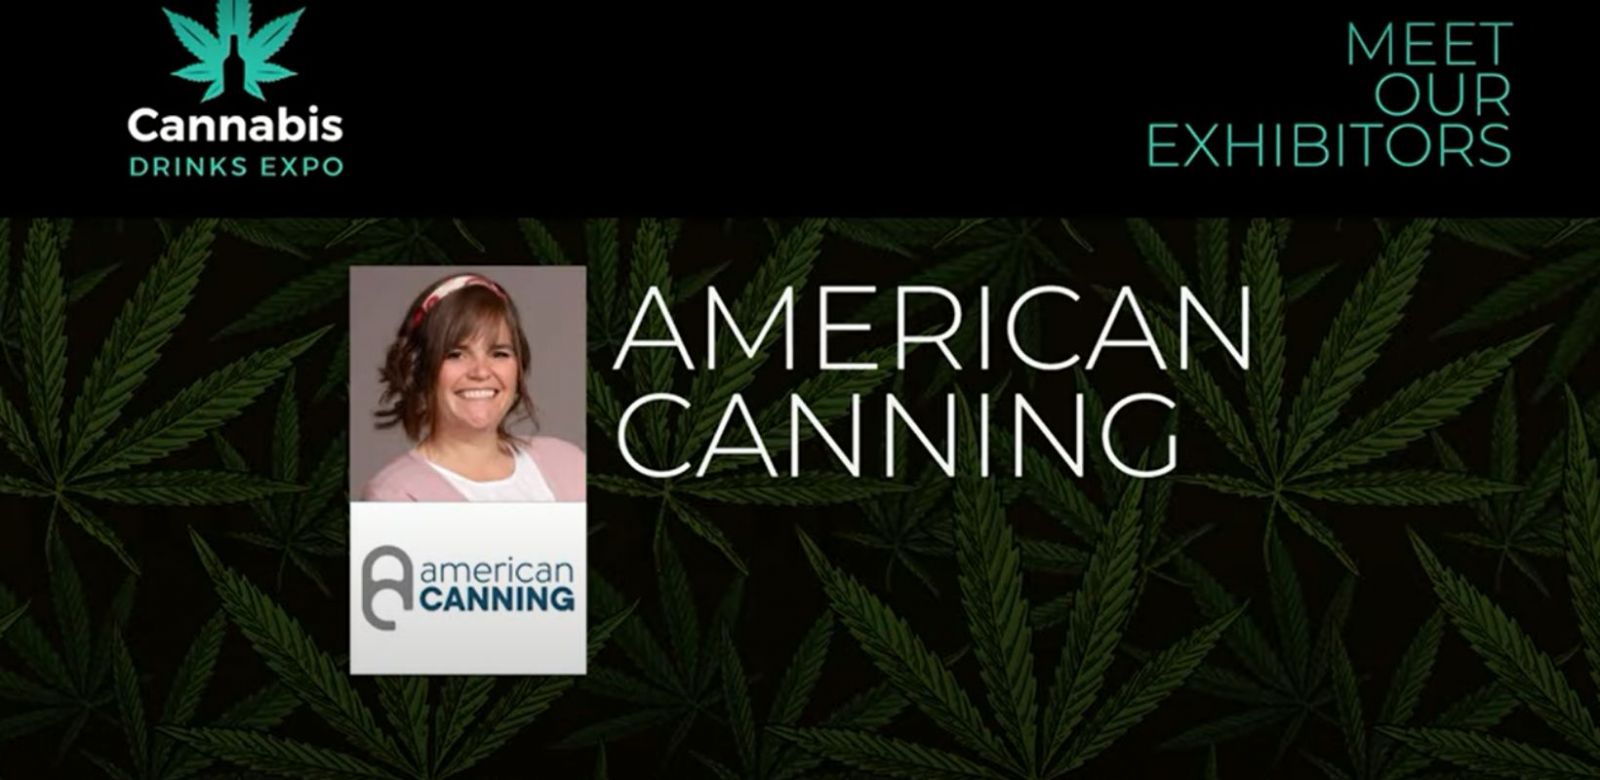 Photo for: Why Partner With American Canning: Cannabis Drinks Expo Exhibitor Spotlight